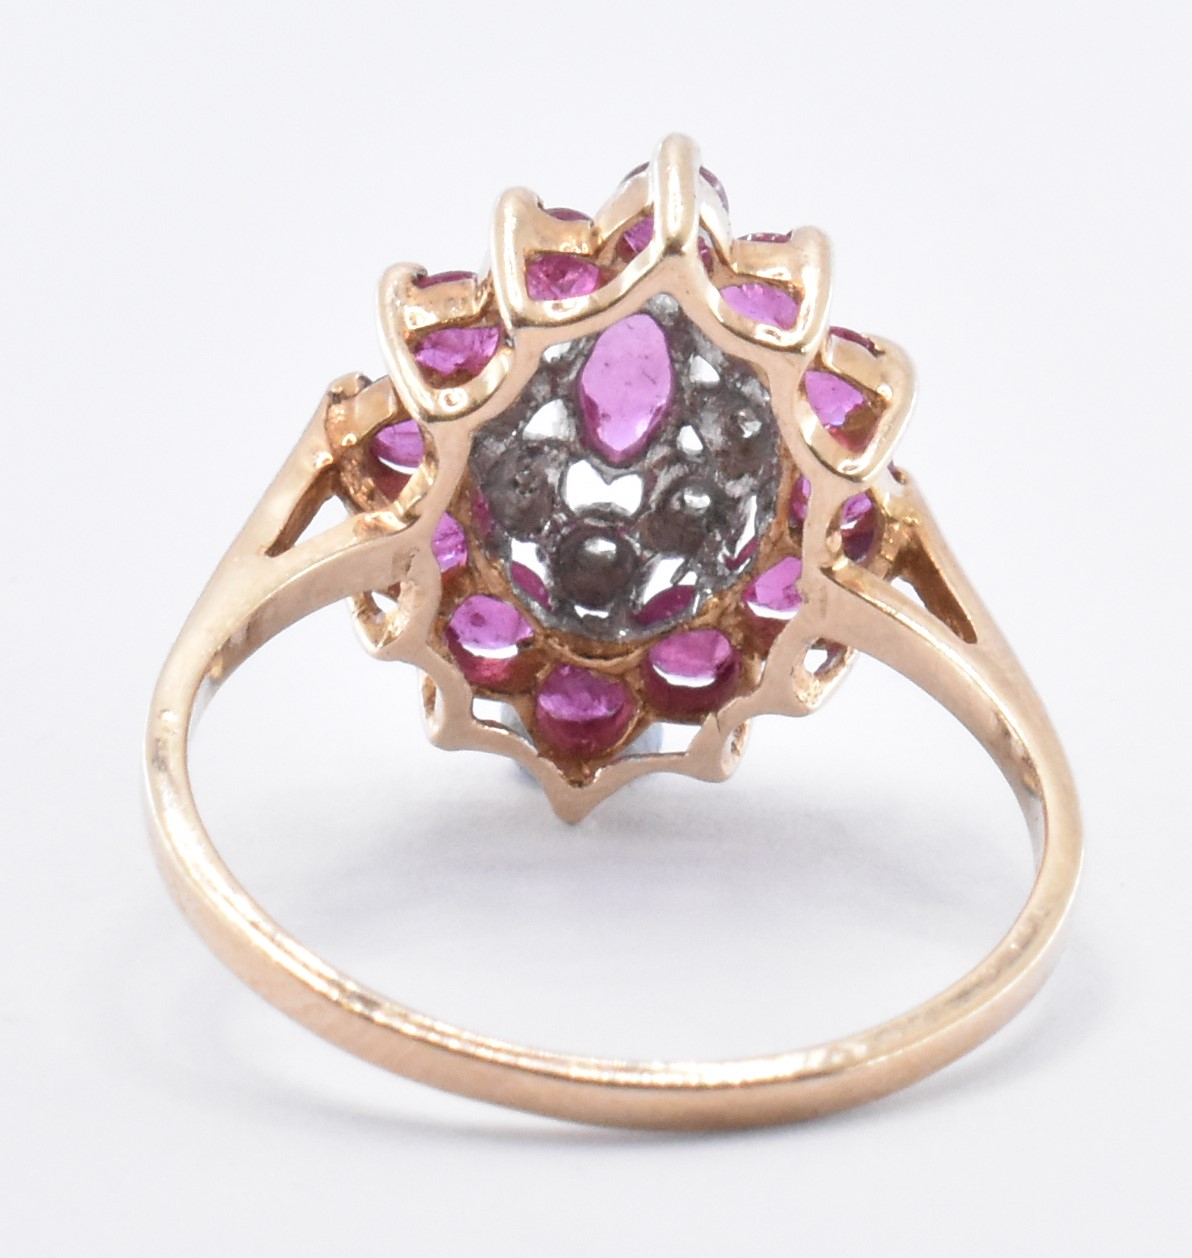 9CT GOLD CLUSTER RING WITH RUBIES AND DIAMONDS - Image 5 of 7